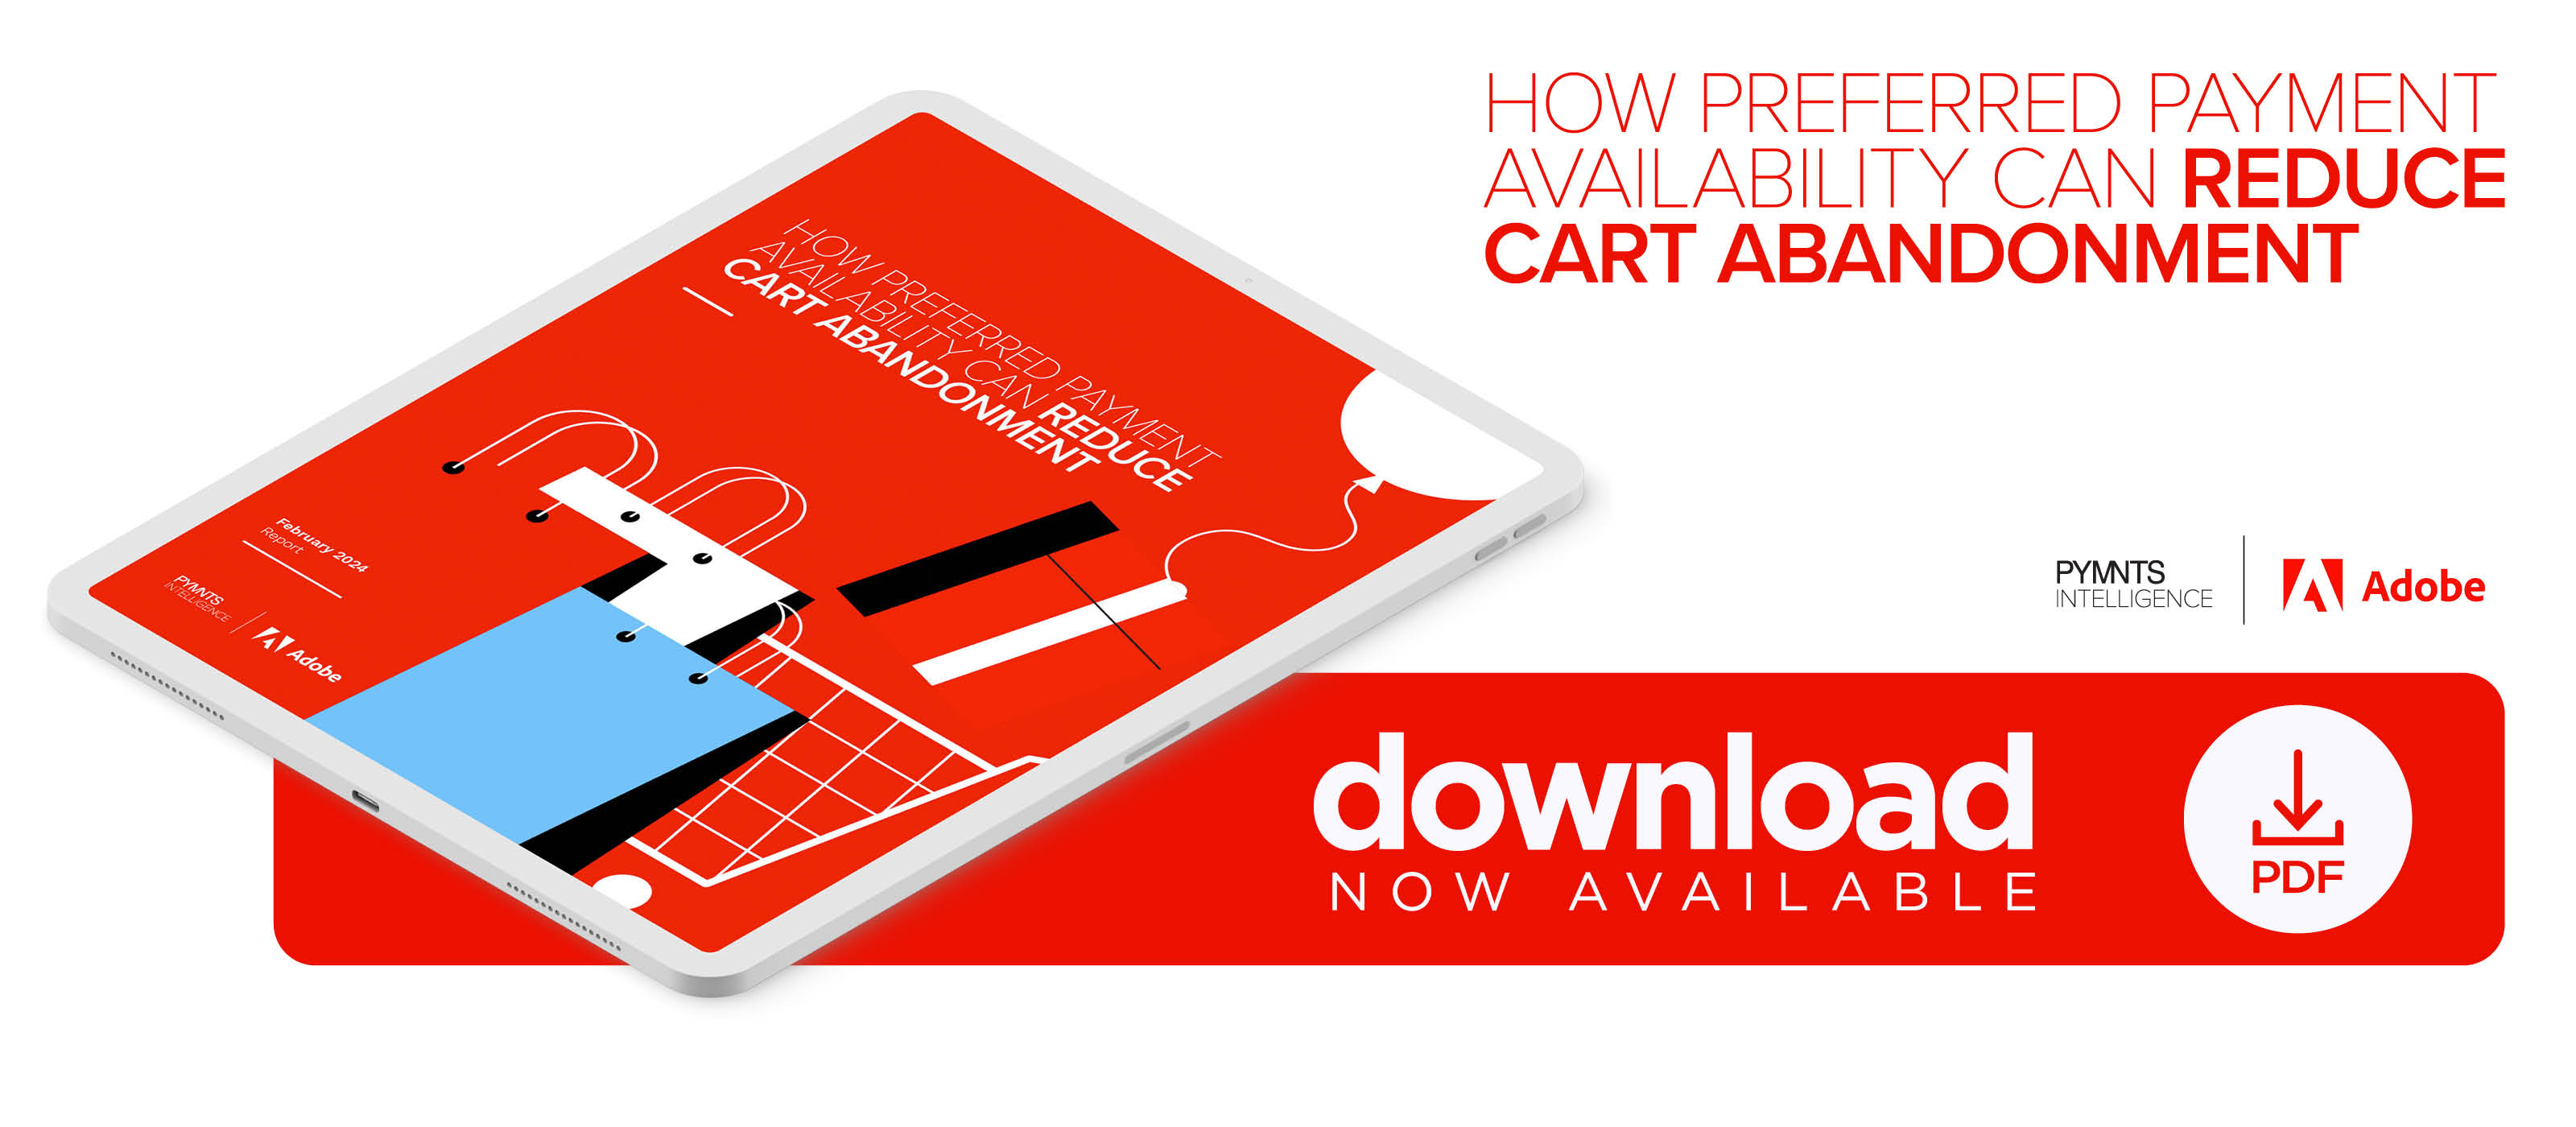 Cart abandonment can be a thing of the past if merchants offer consumers’ their preferred payment method when shopping online.